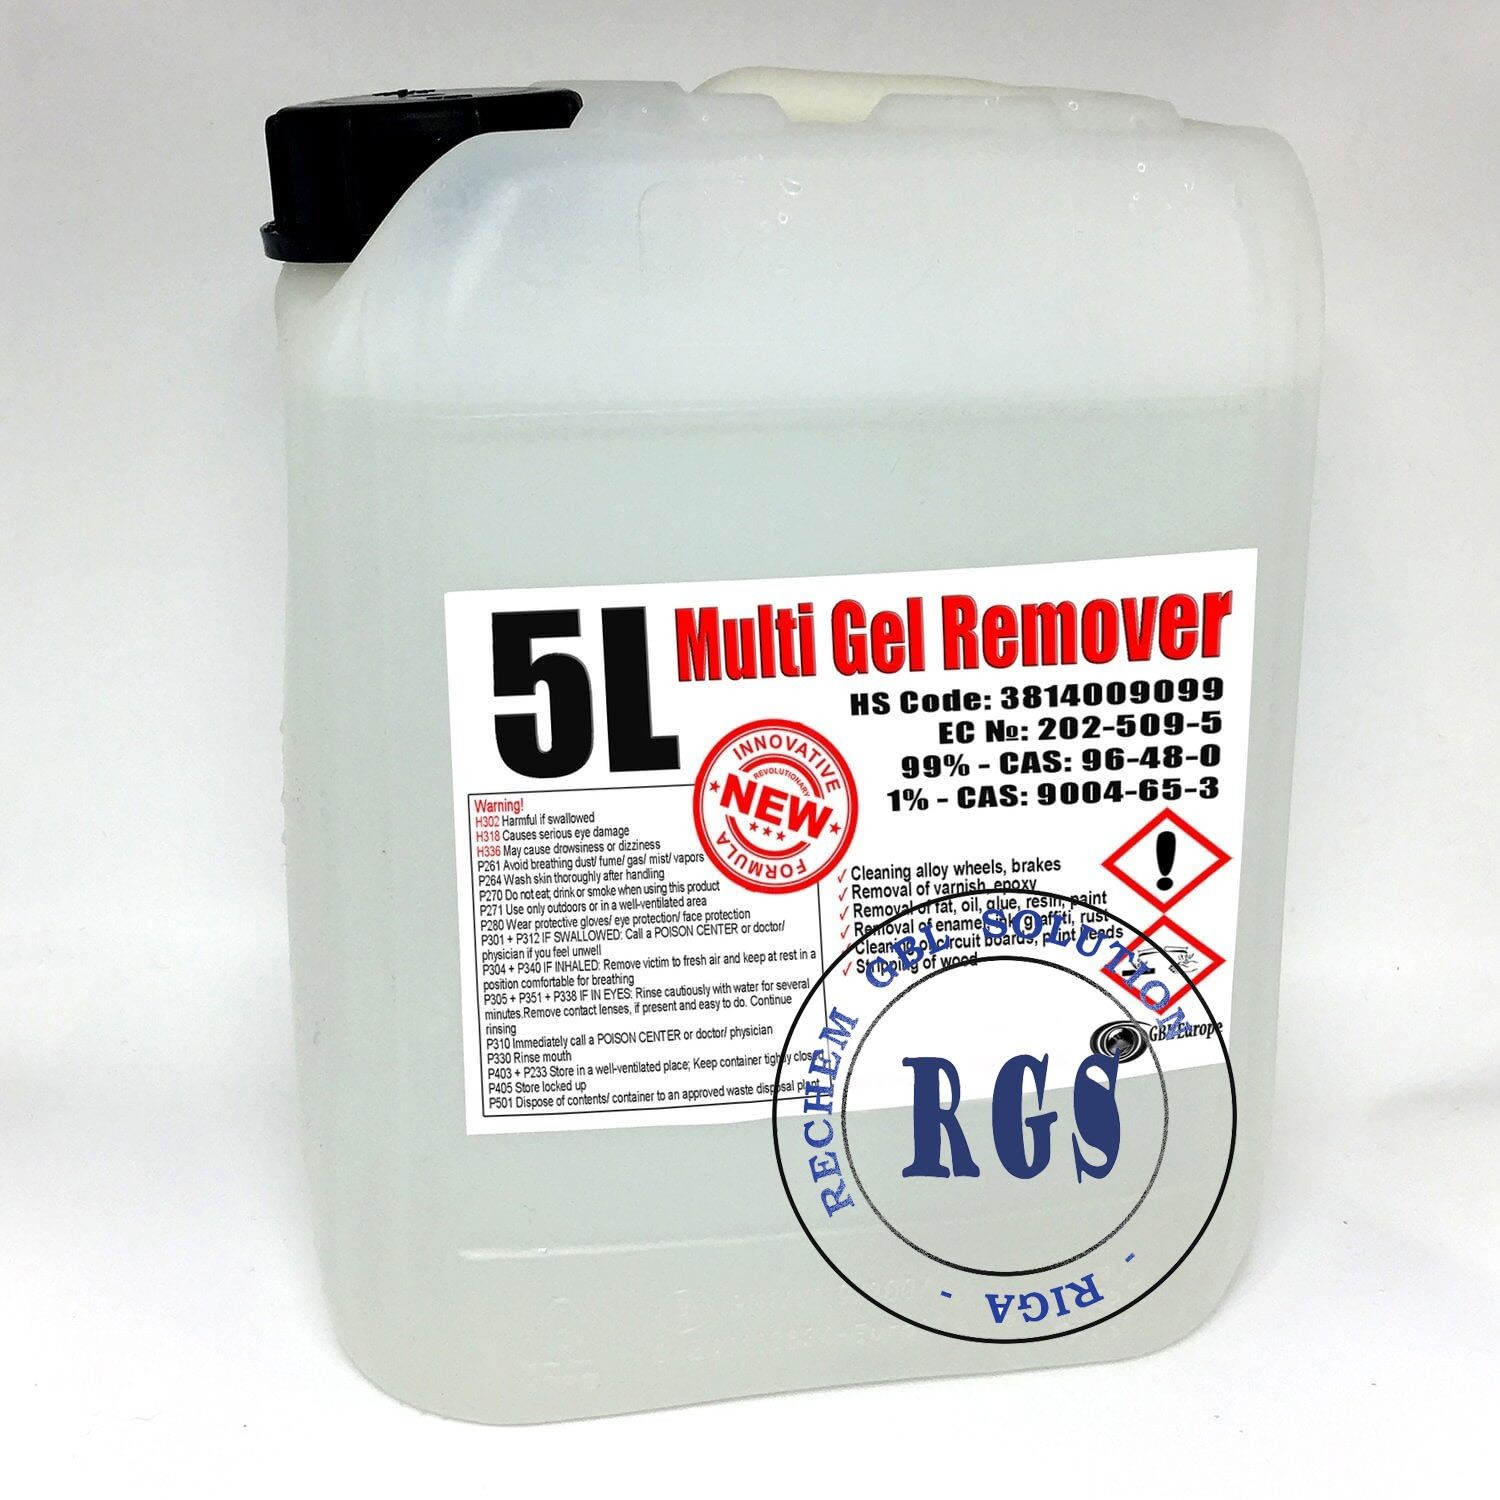 Buy Gbl Cleaner For Sale from rechem gbl solution, Cameroon